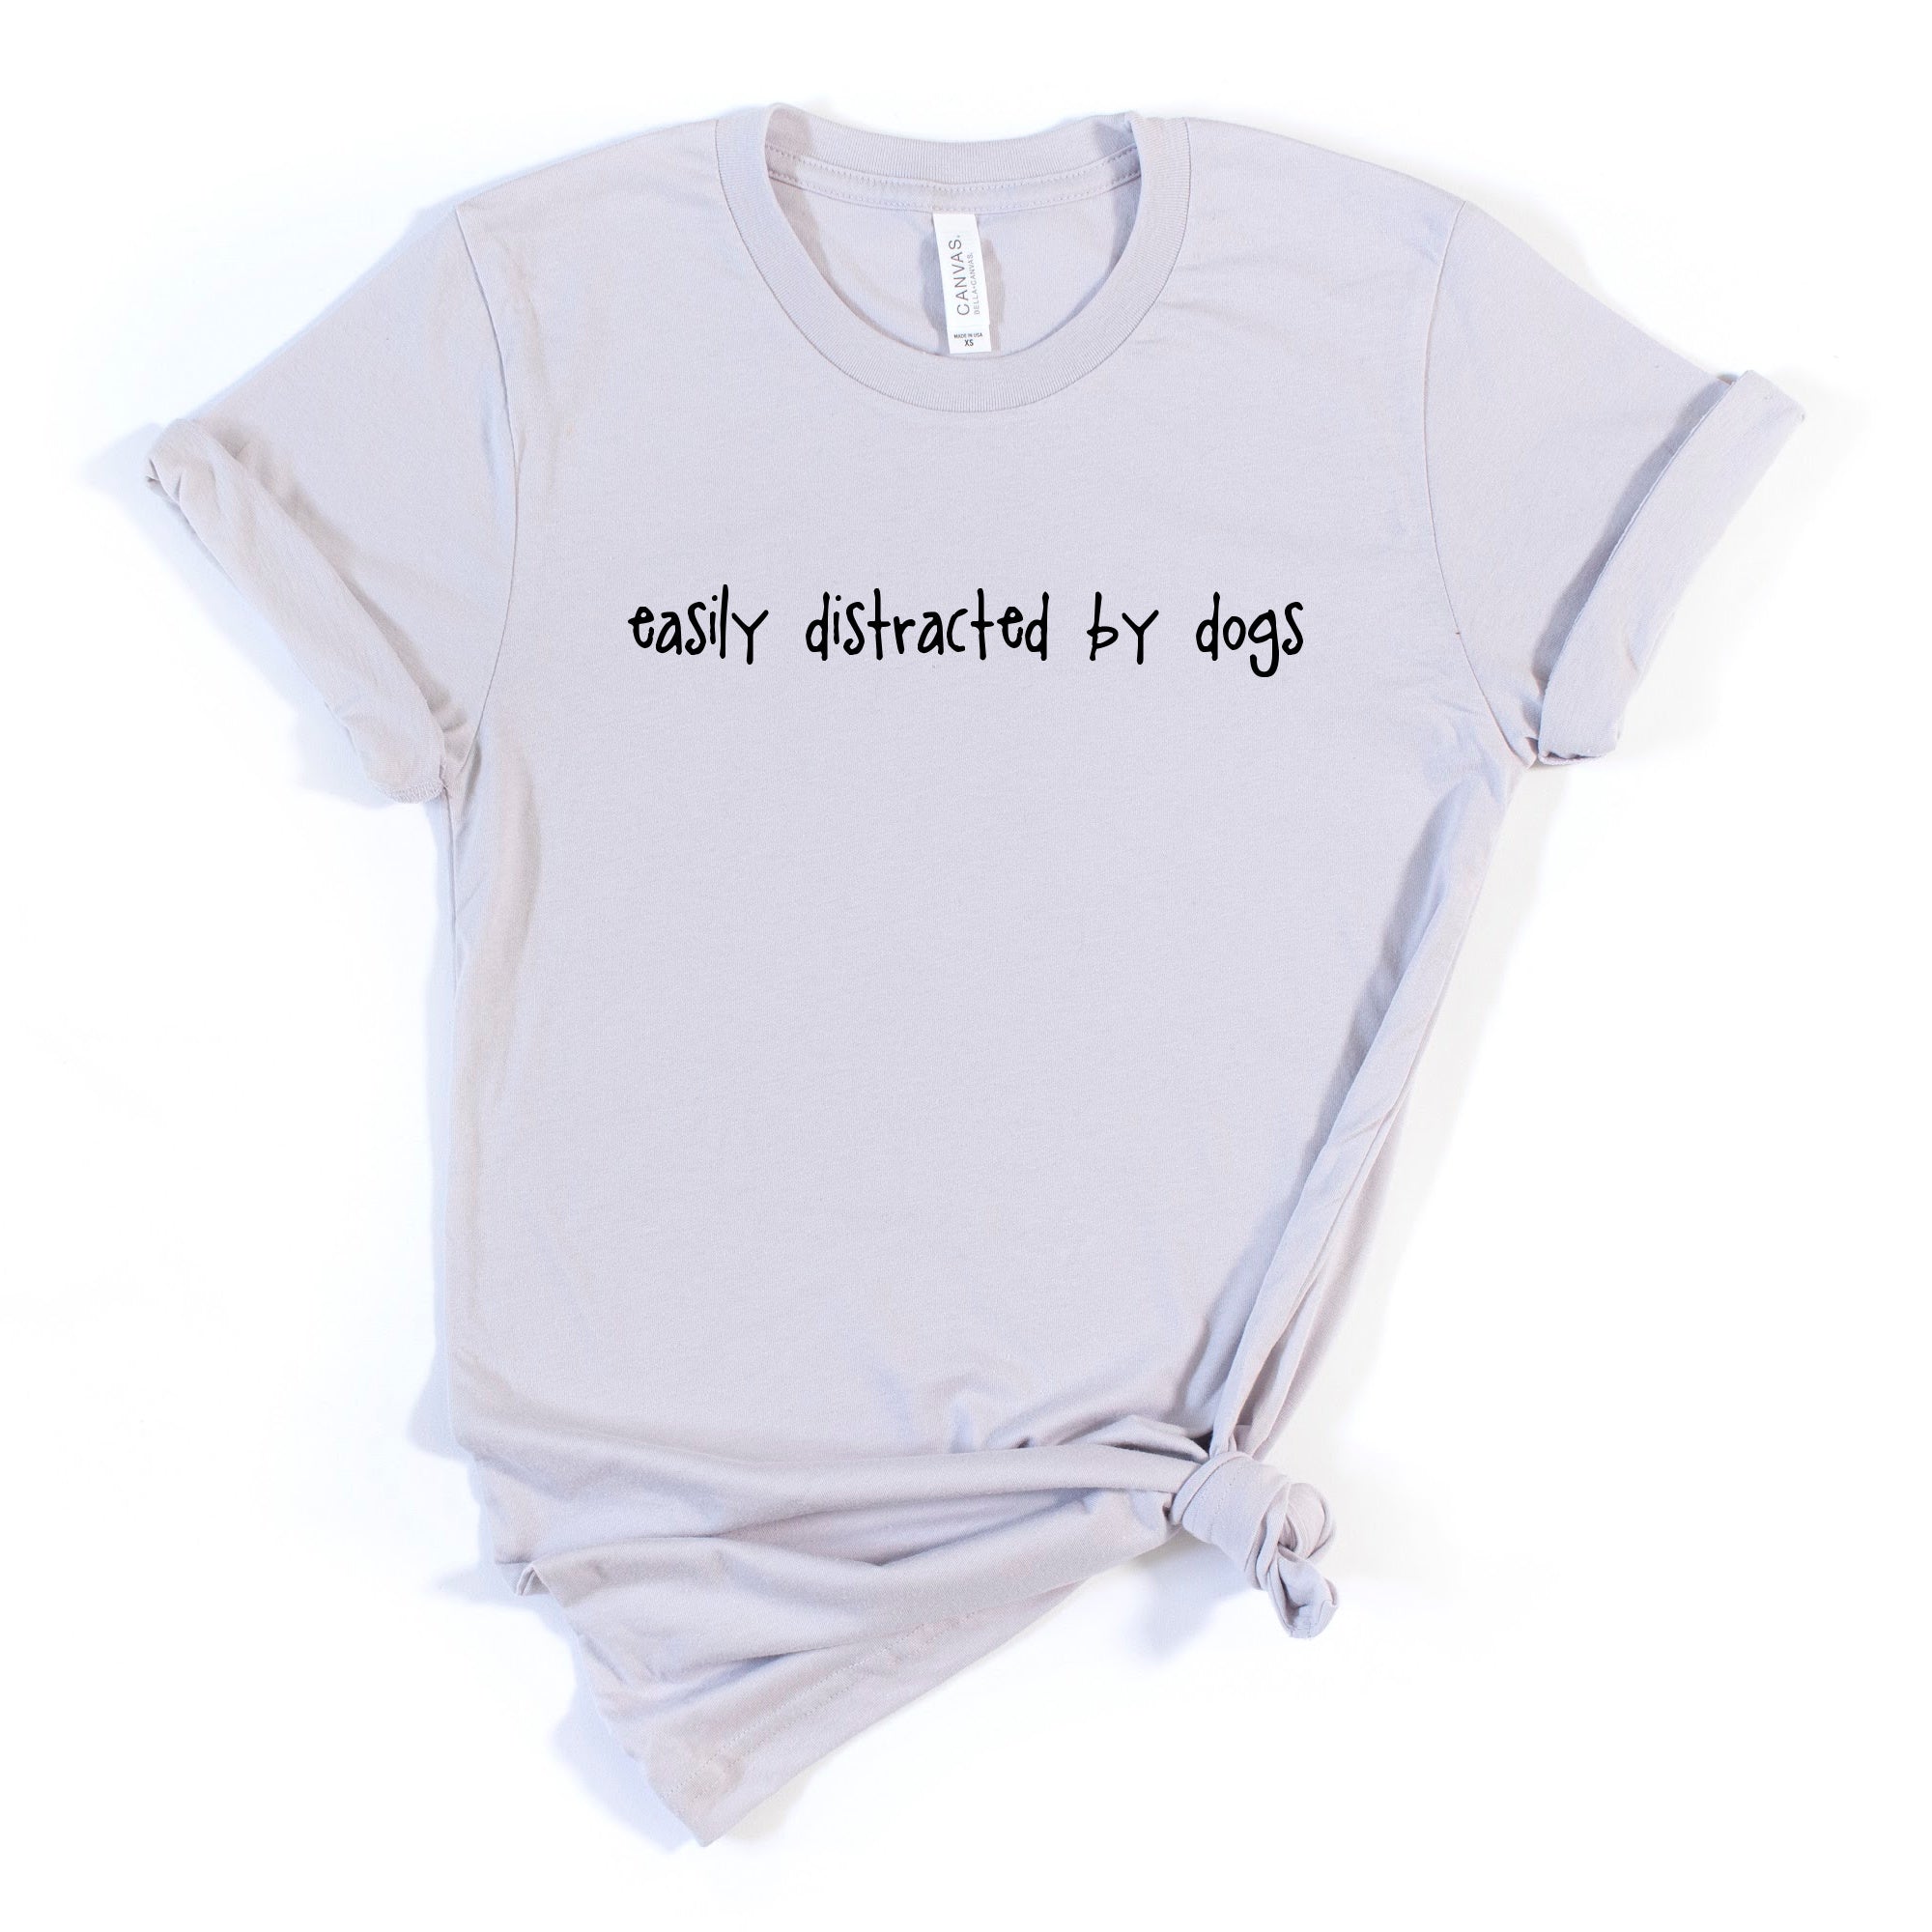 Easily Distracted by Dogs T-Shirt - Ladies Relaxed Fit